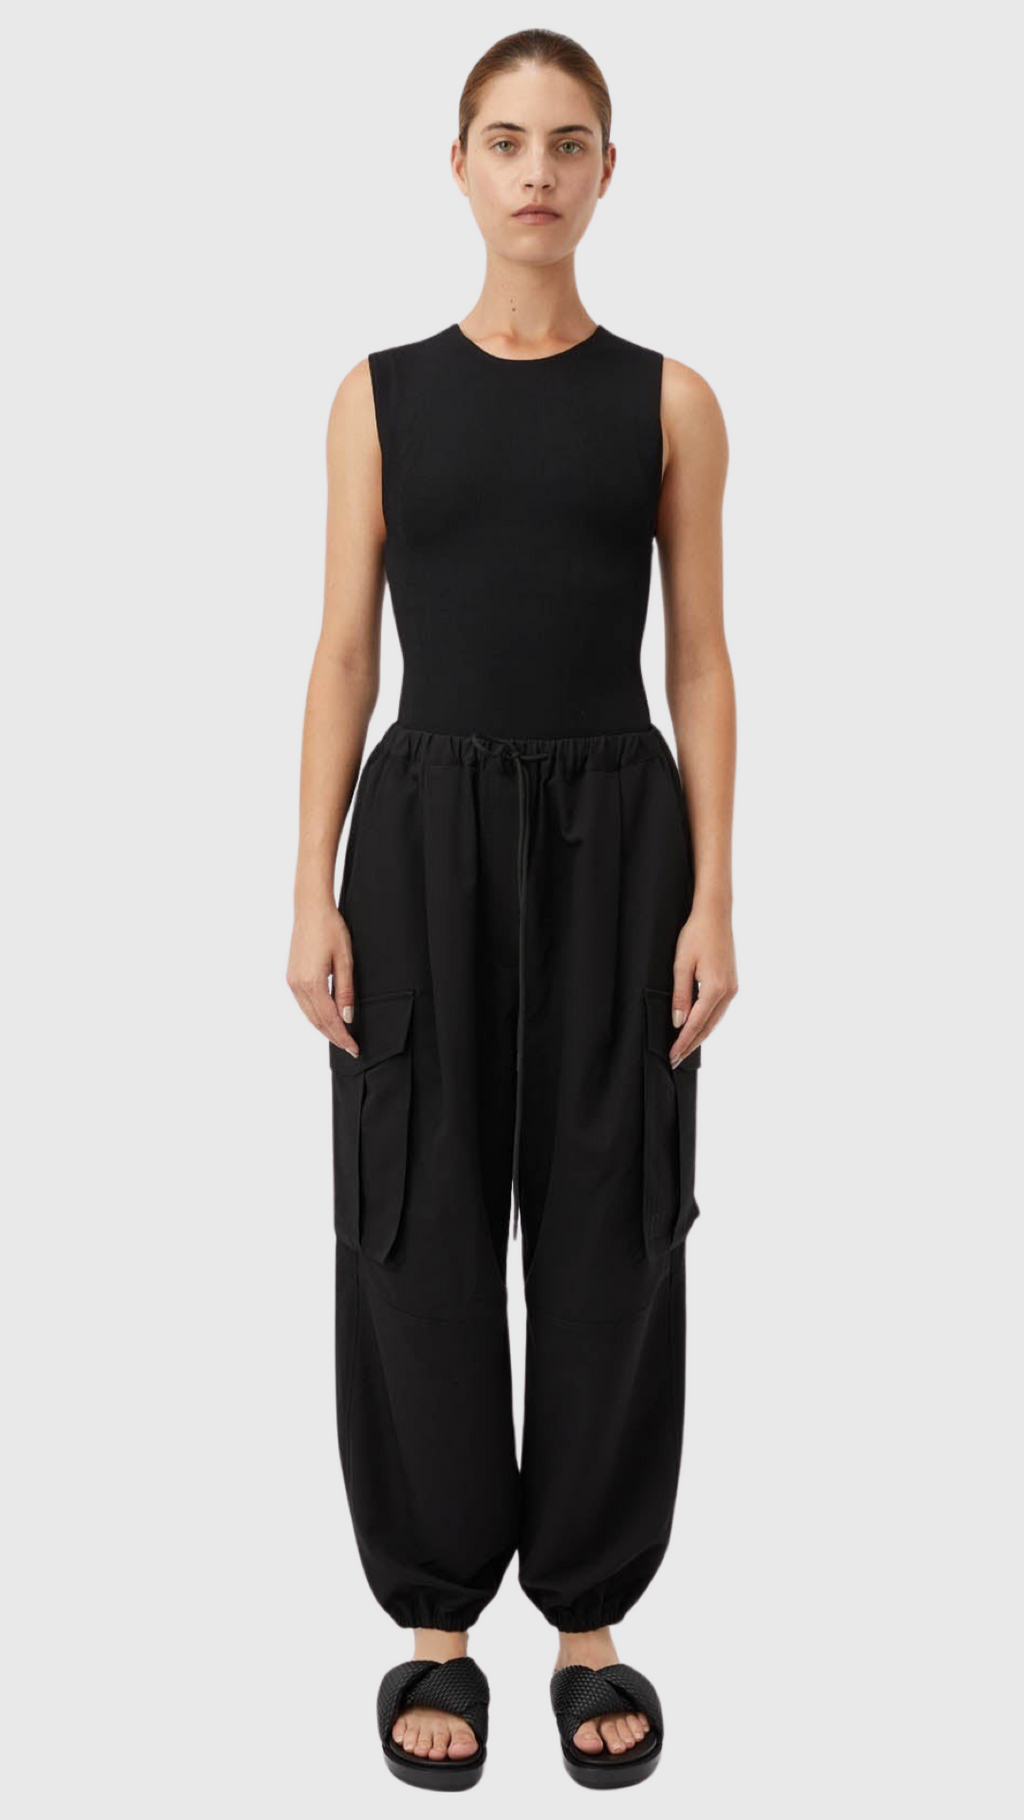 camilla and marc archer cargo pant black